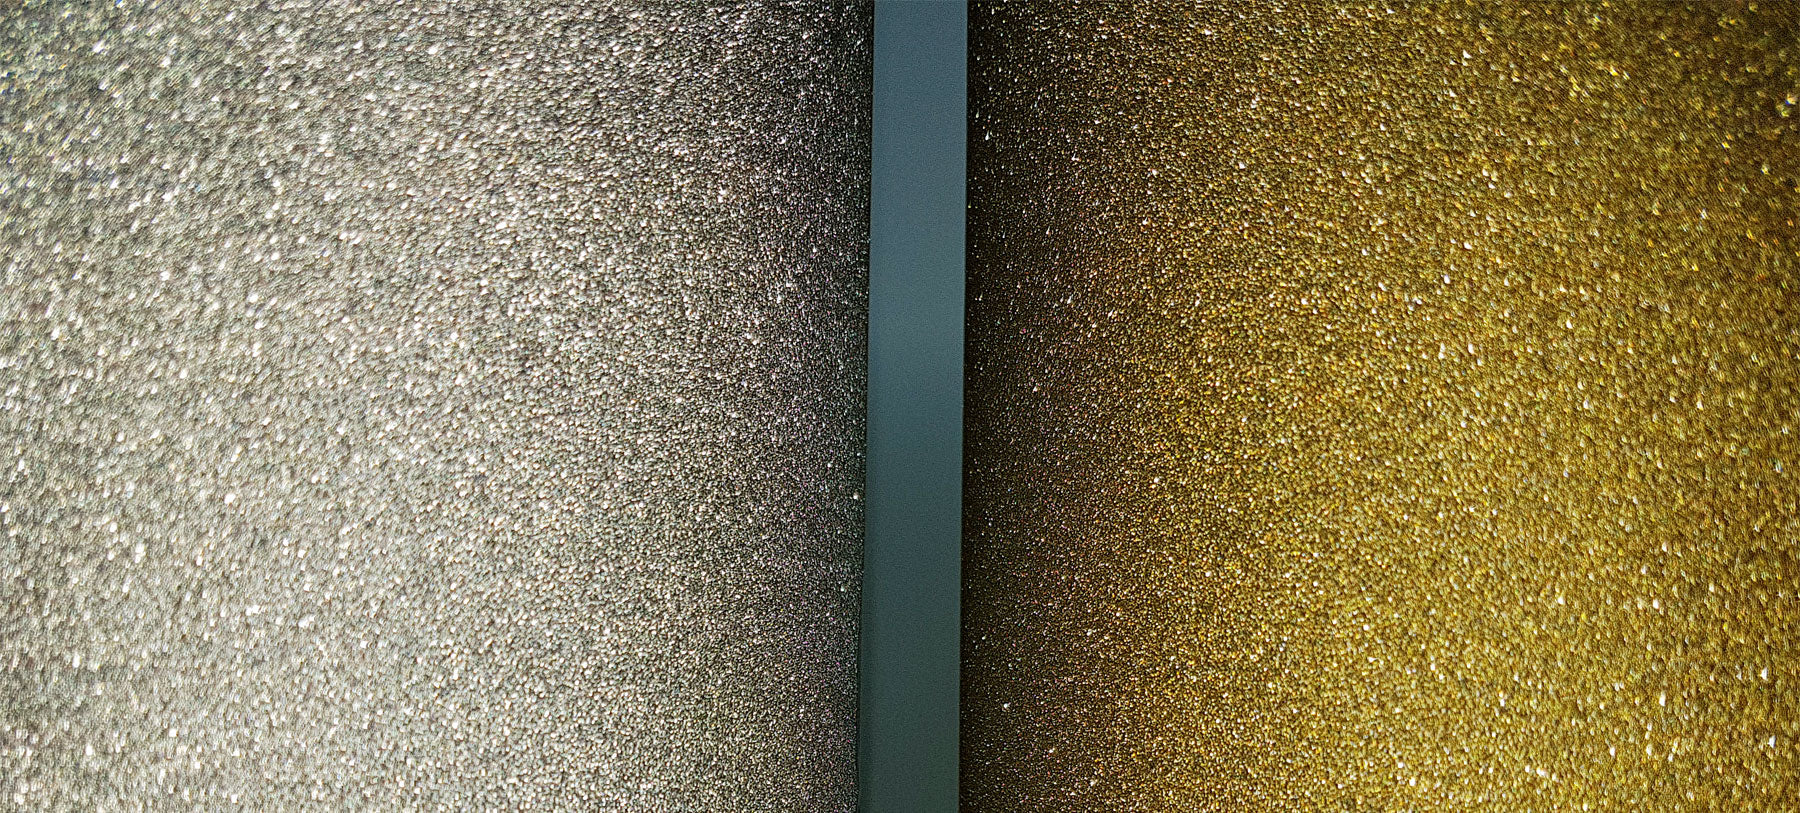 Add some sparkle with NEW Glitter Laminating Films